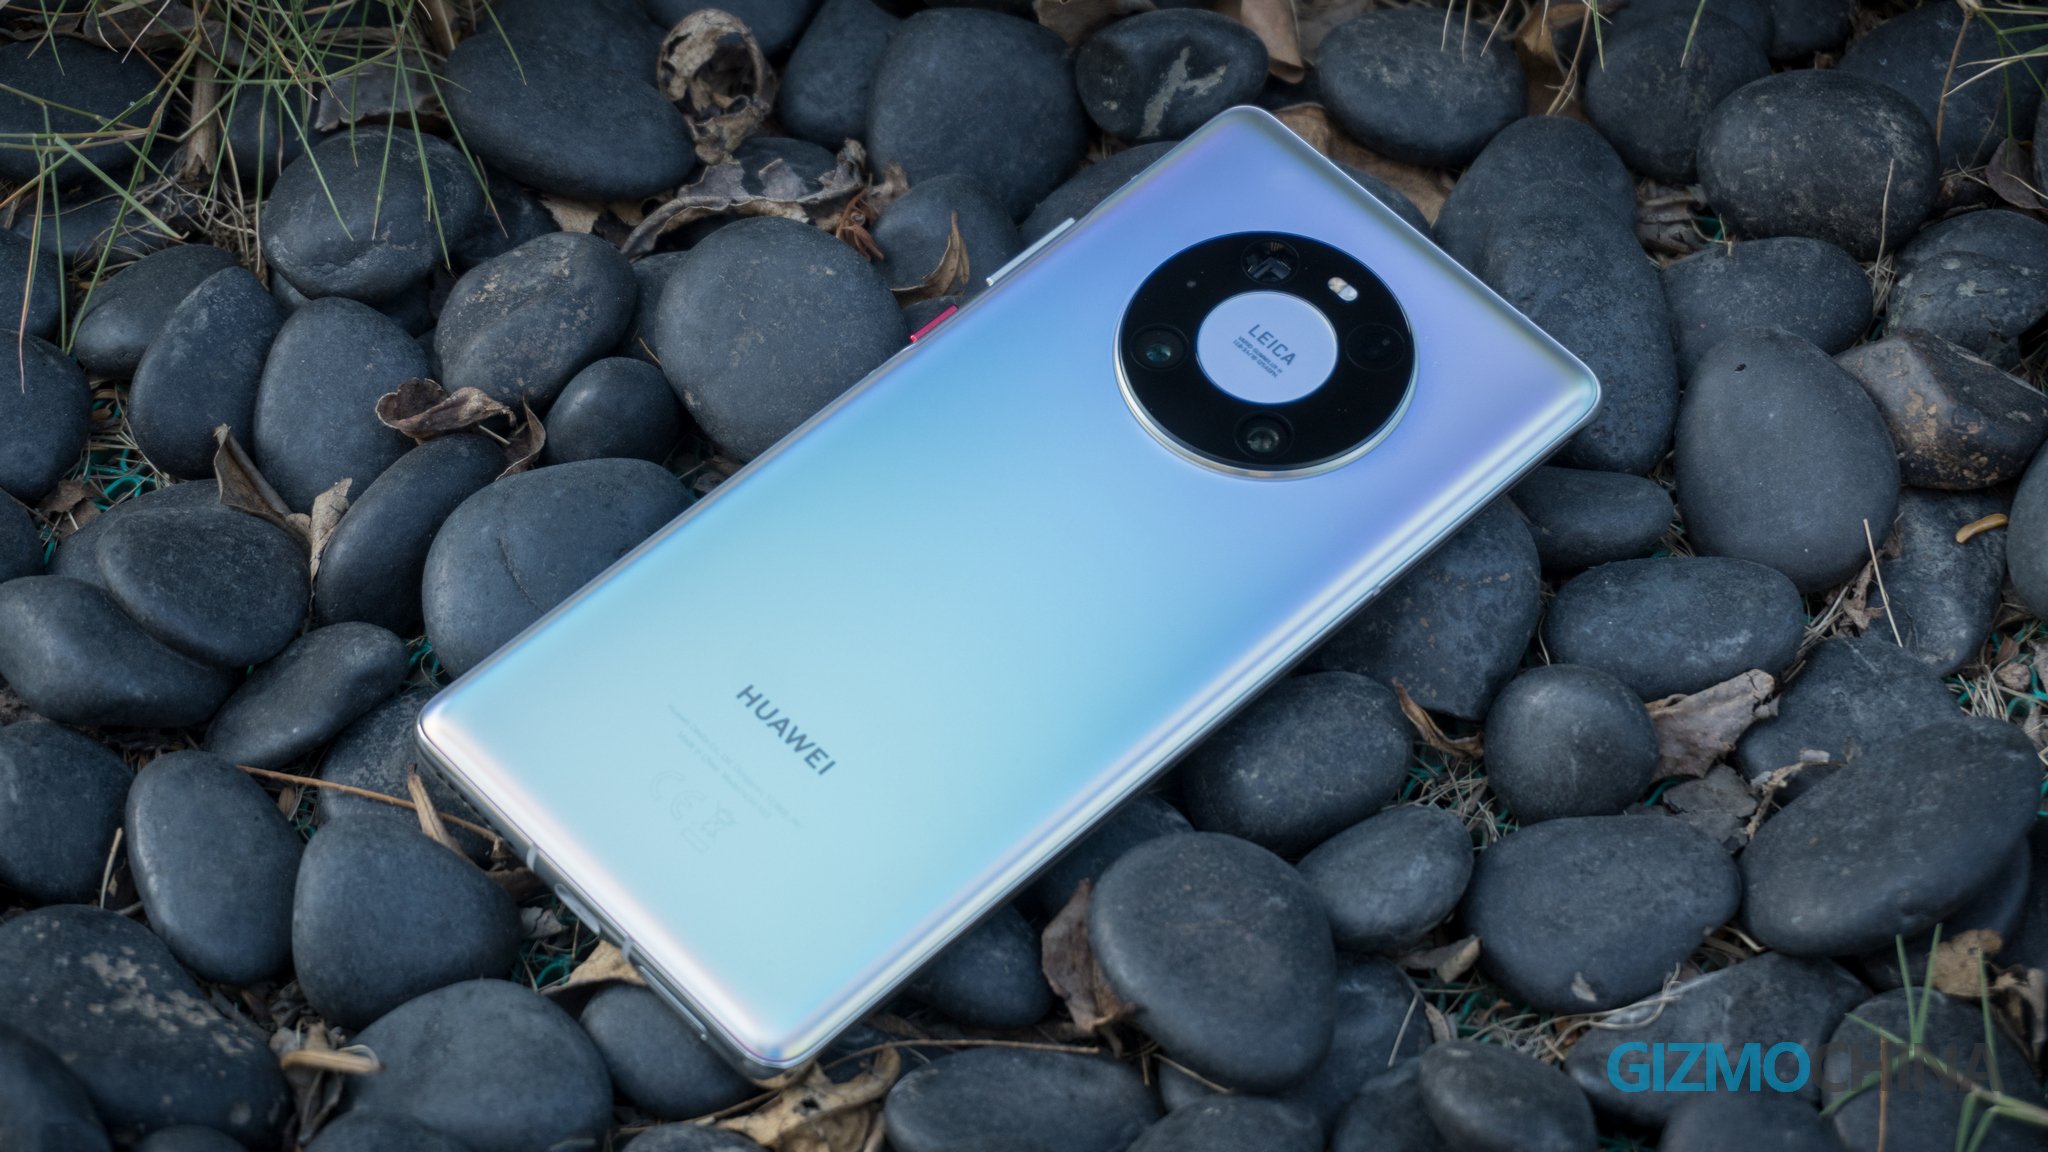 Huawei Mate 40 series is the first of its kind to support hardware wallet for China’s Digital Currency